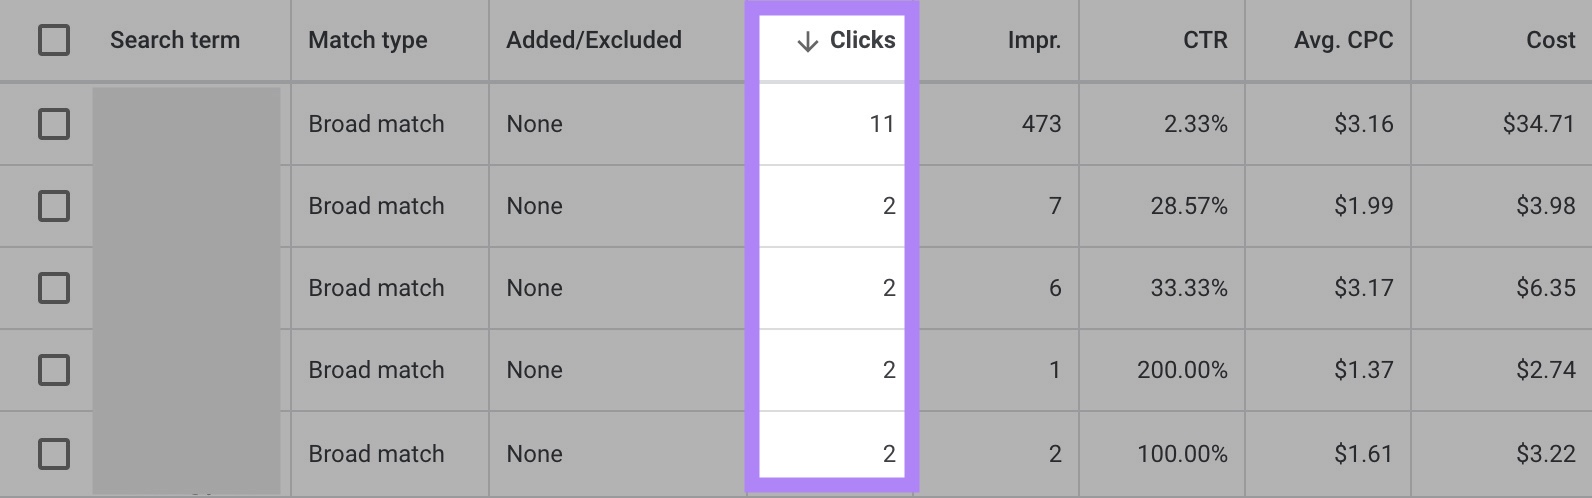 Clicks metric within Google Ads